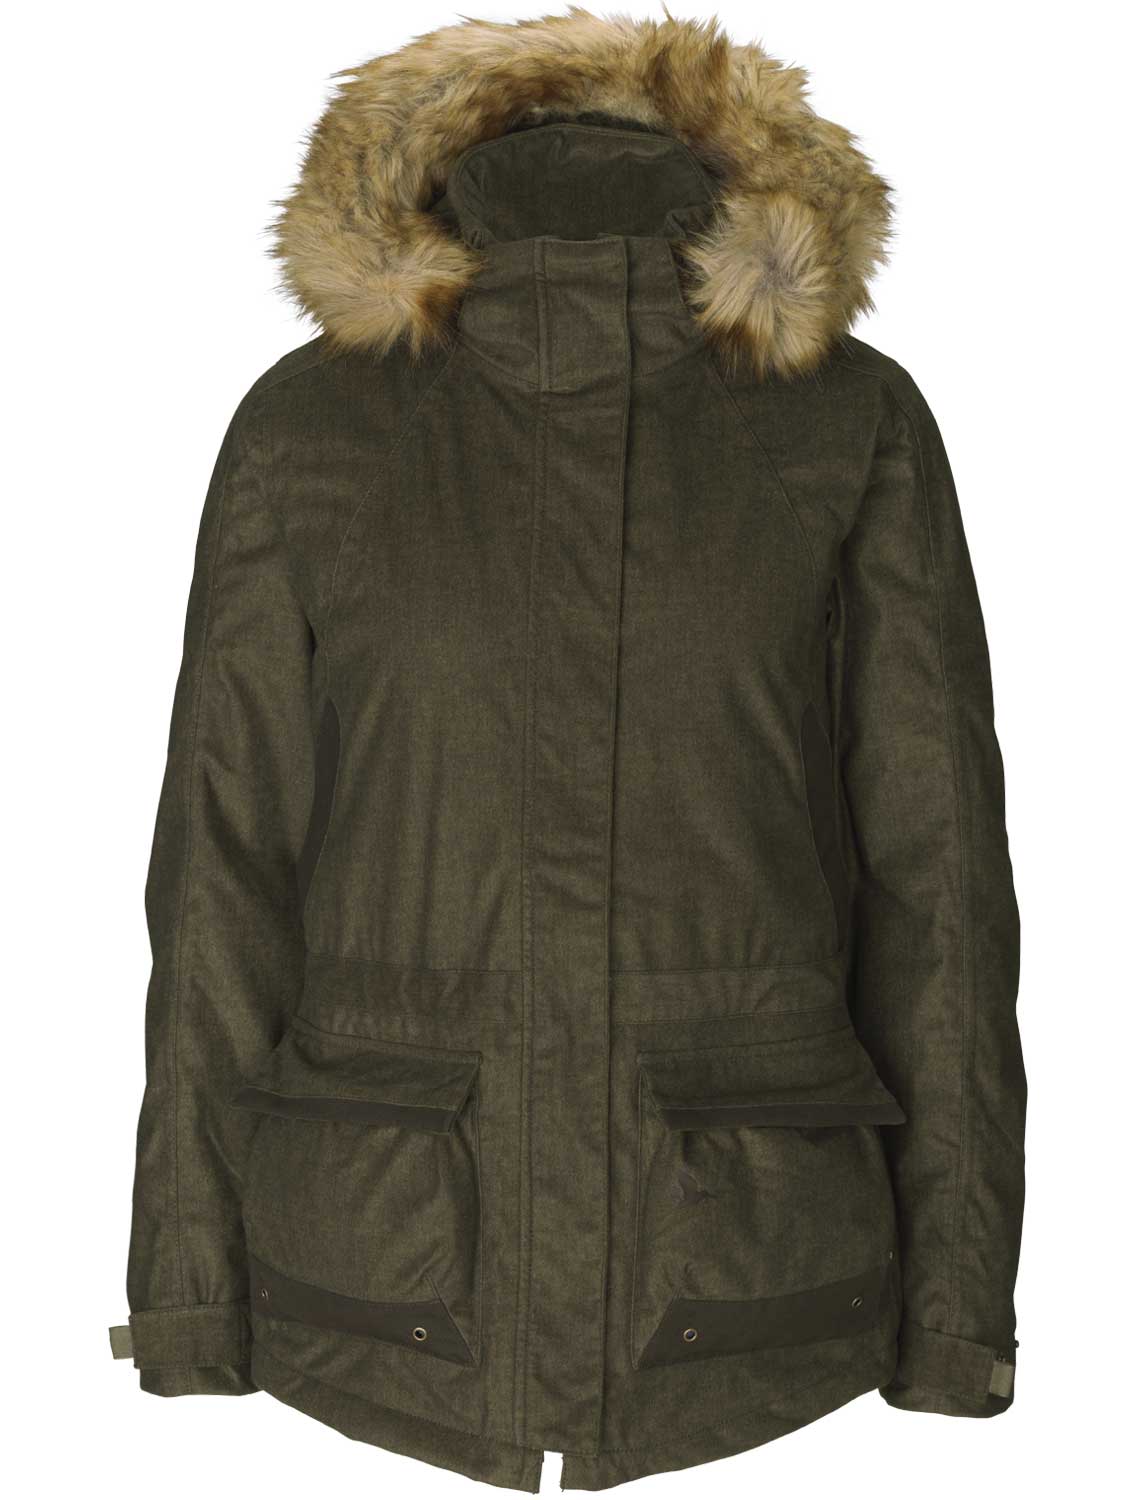 SEELAND Jacket - Ladies North Thinsulate Lined - Pine Green